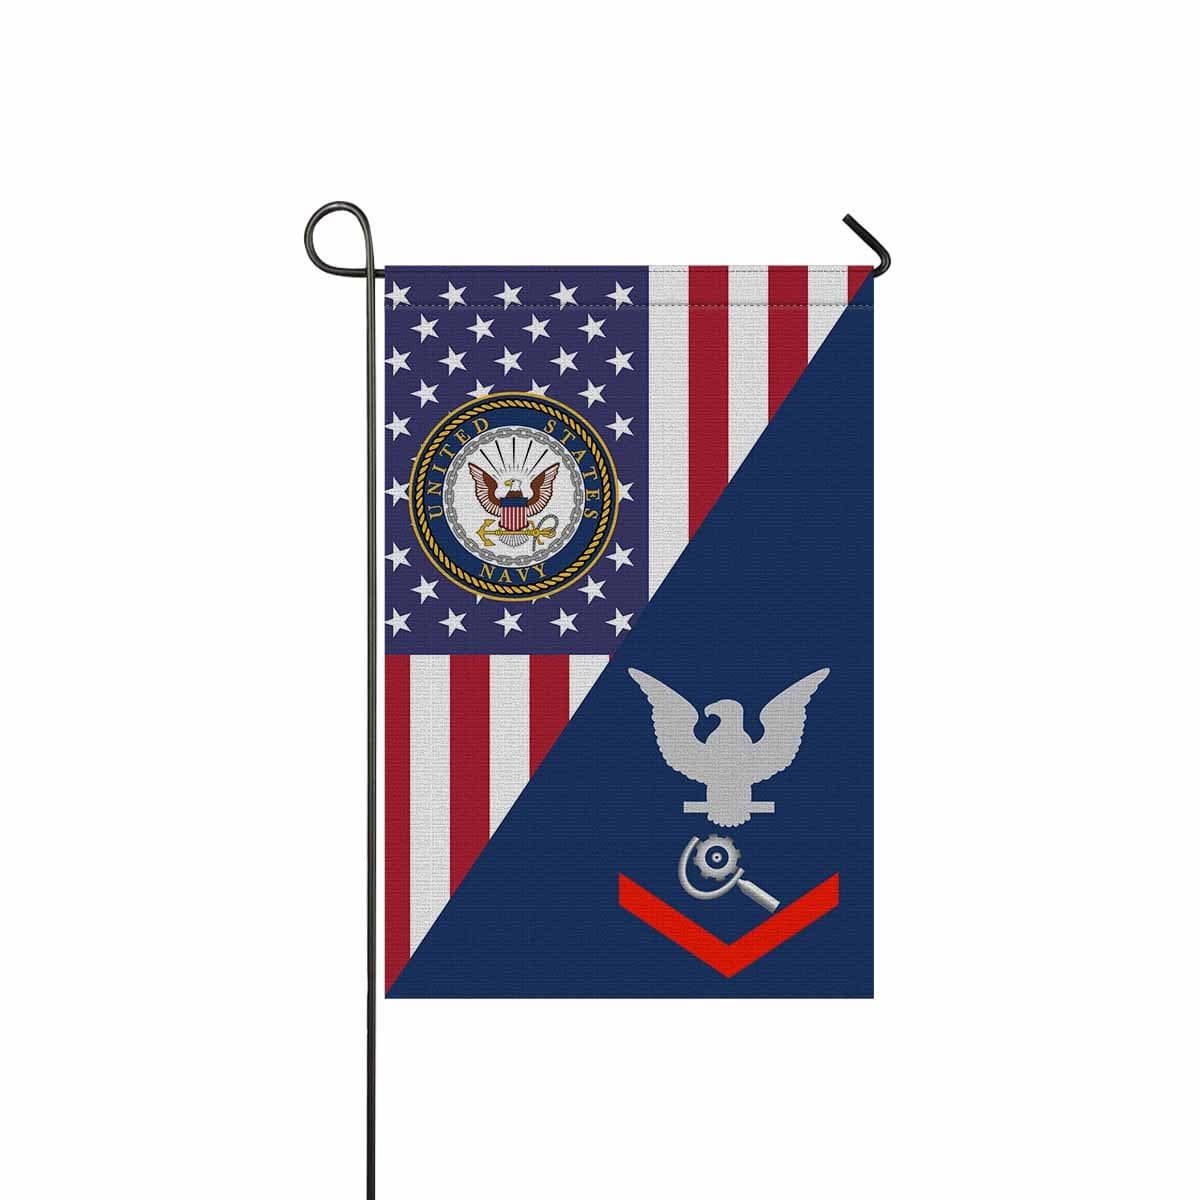 U.S Navy Machinery repairman Navy MR E-4 Garden Flag/Yard Flag 12 inches x 18 inches Twin-Side Printing-GDFlag-Navy-Rating-Veterans Nation